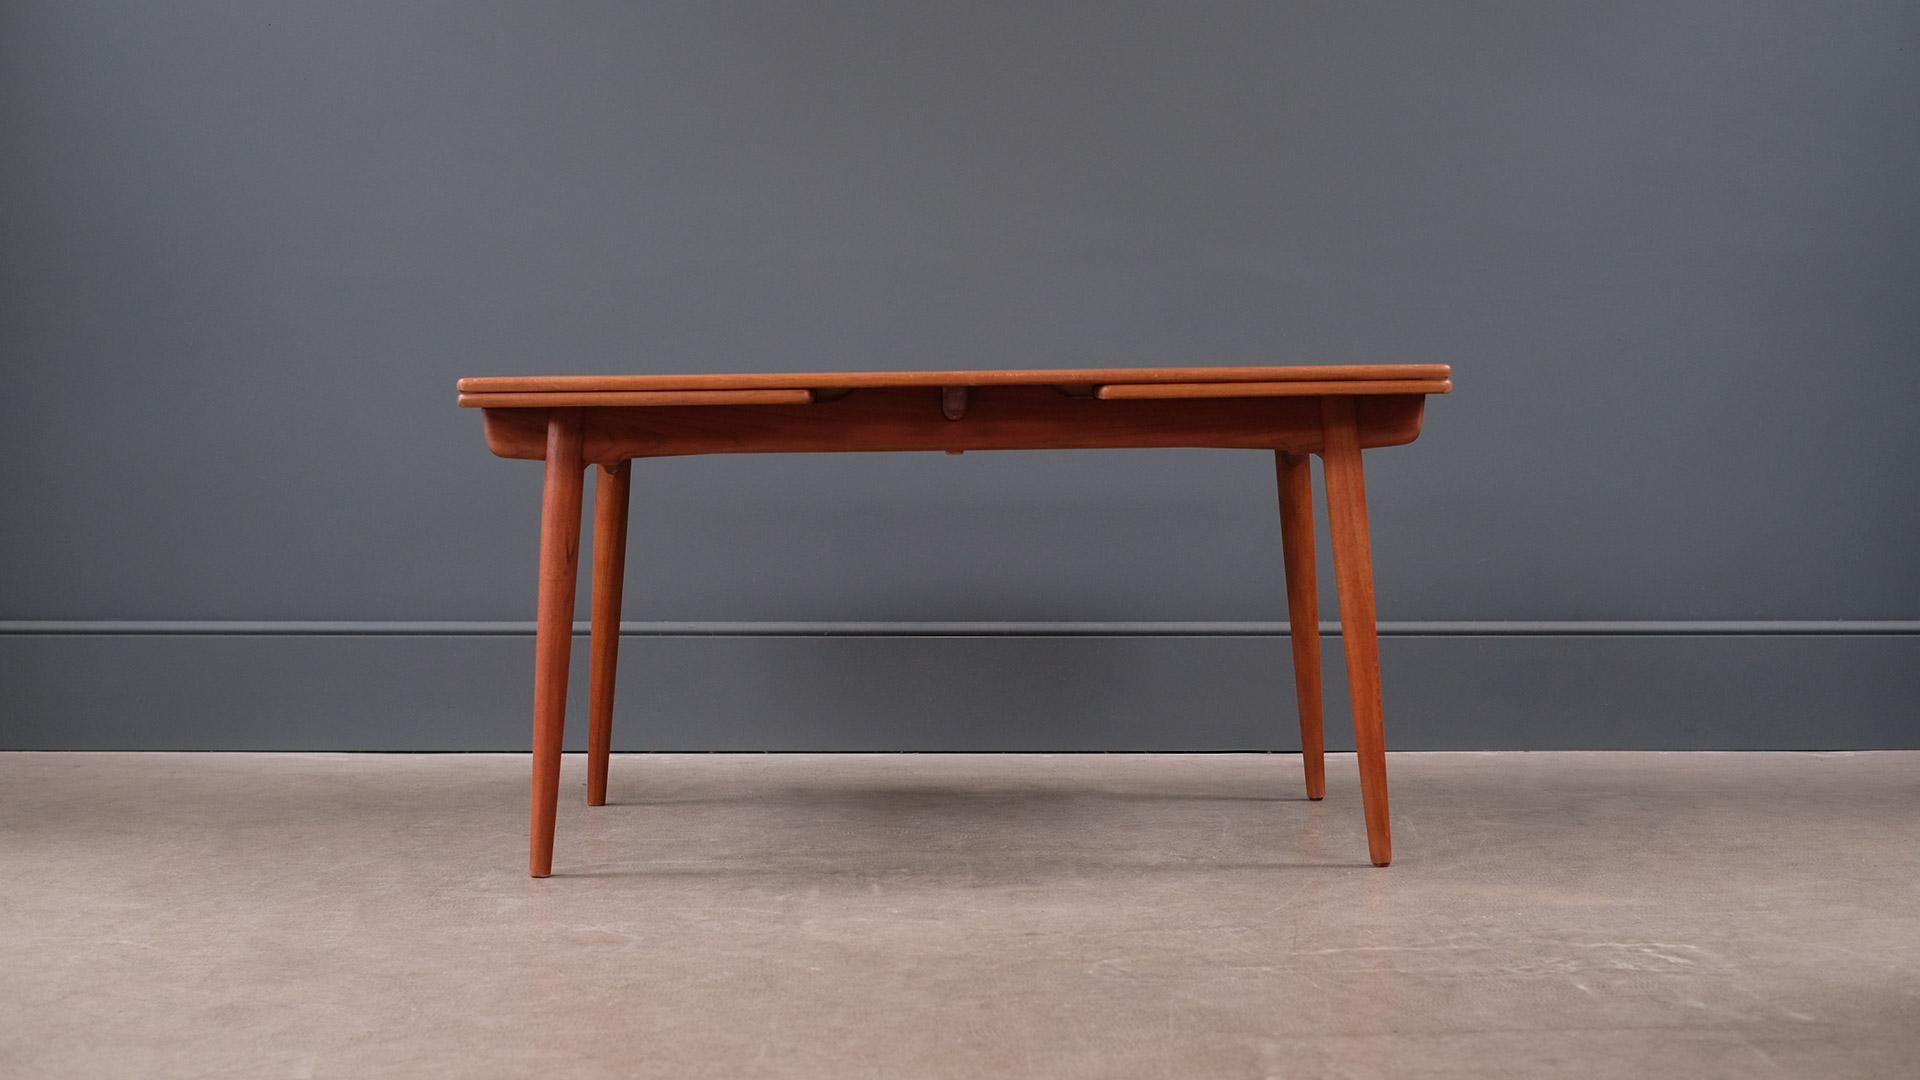 Fantastic AT 312 extending dining table in oak with contrasting teak top designed by Hans Wegner for Andreas Tuck, Denmark. Very beautiful example of this Classic table by Wegner.